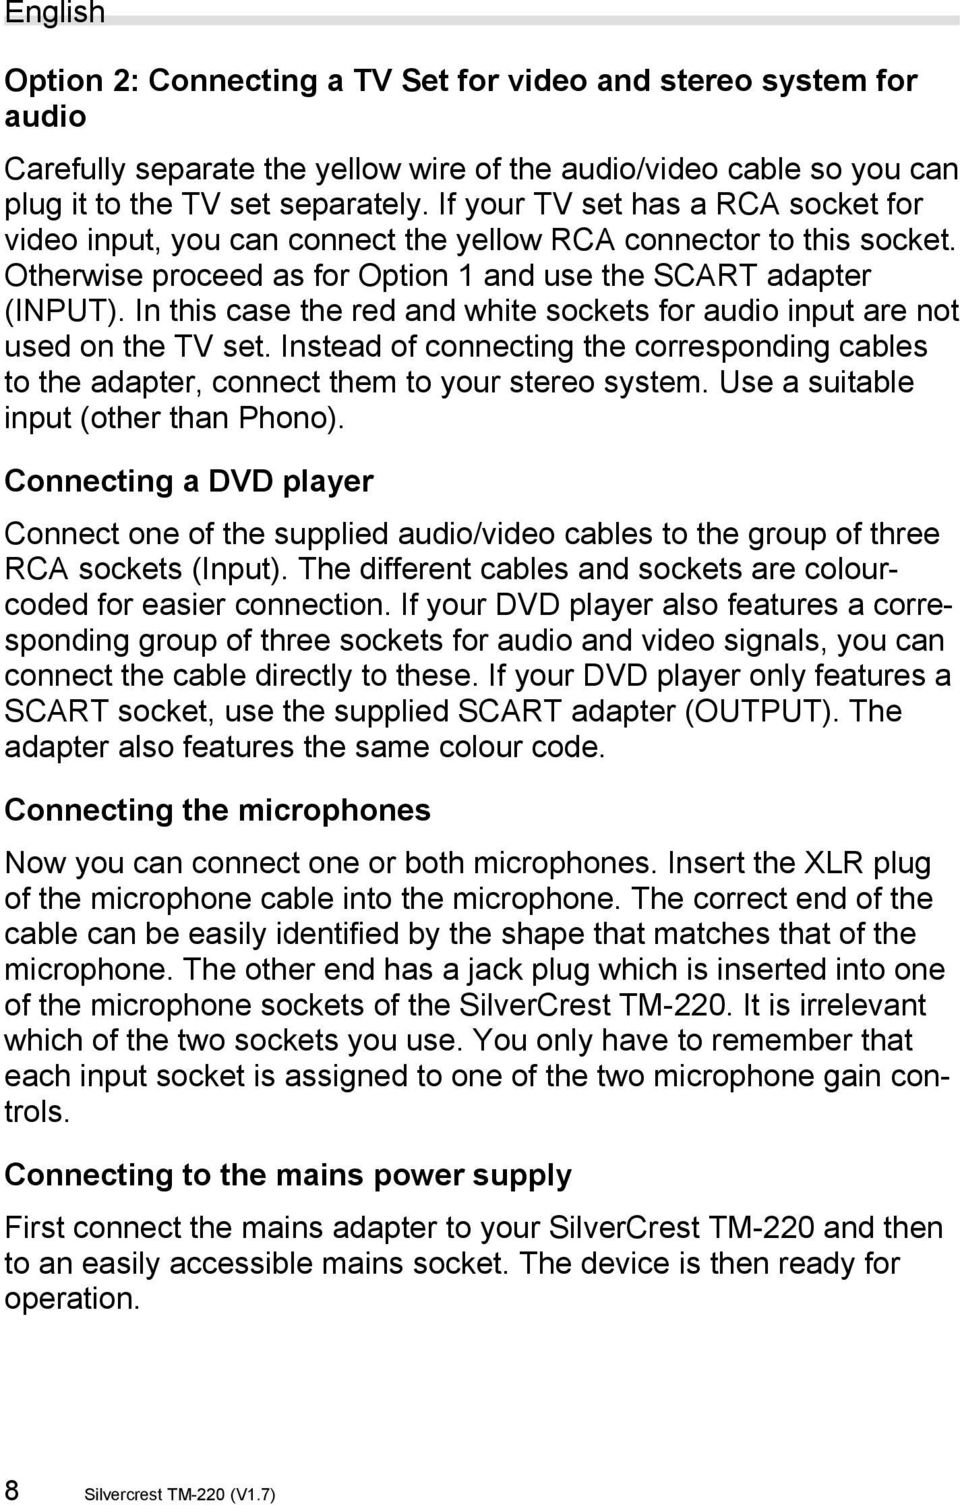 In this case the red and white sockets for audio input are not used on the TV set. Instead of connecting the corresponding cables to the adapter, connect them to your stereo system.